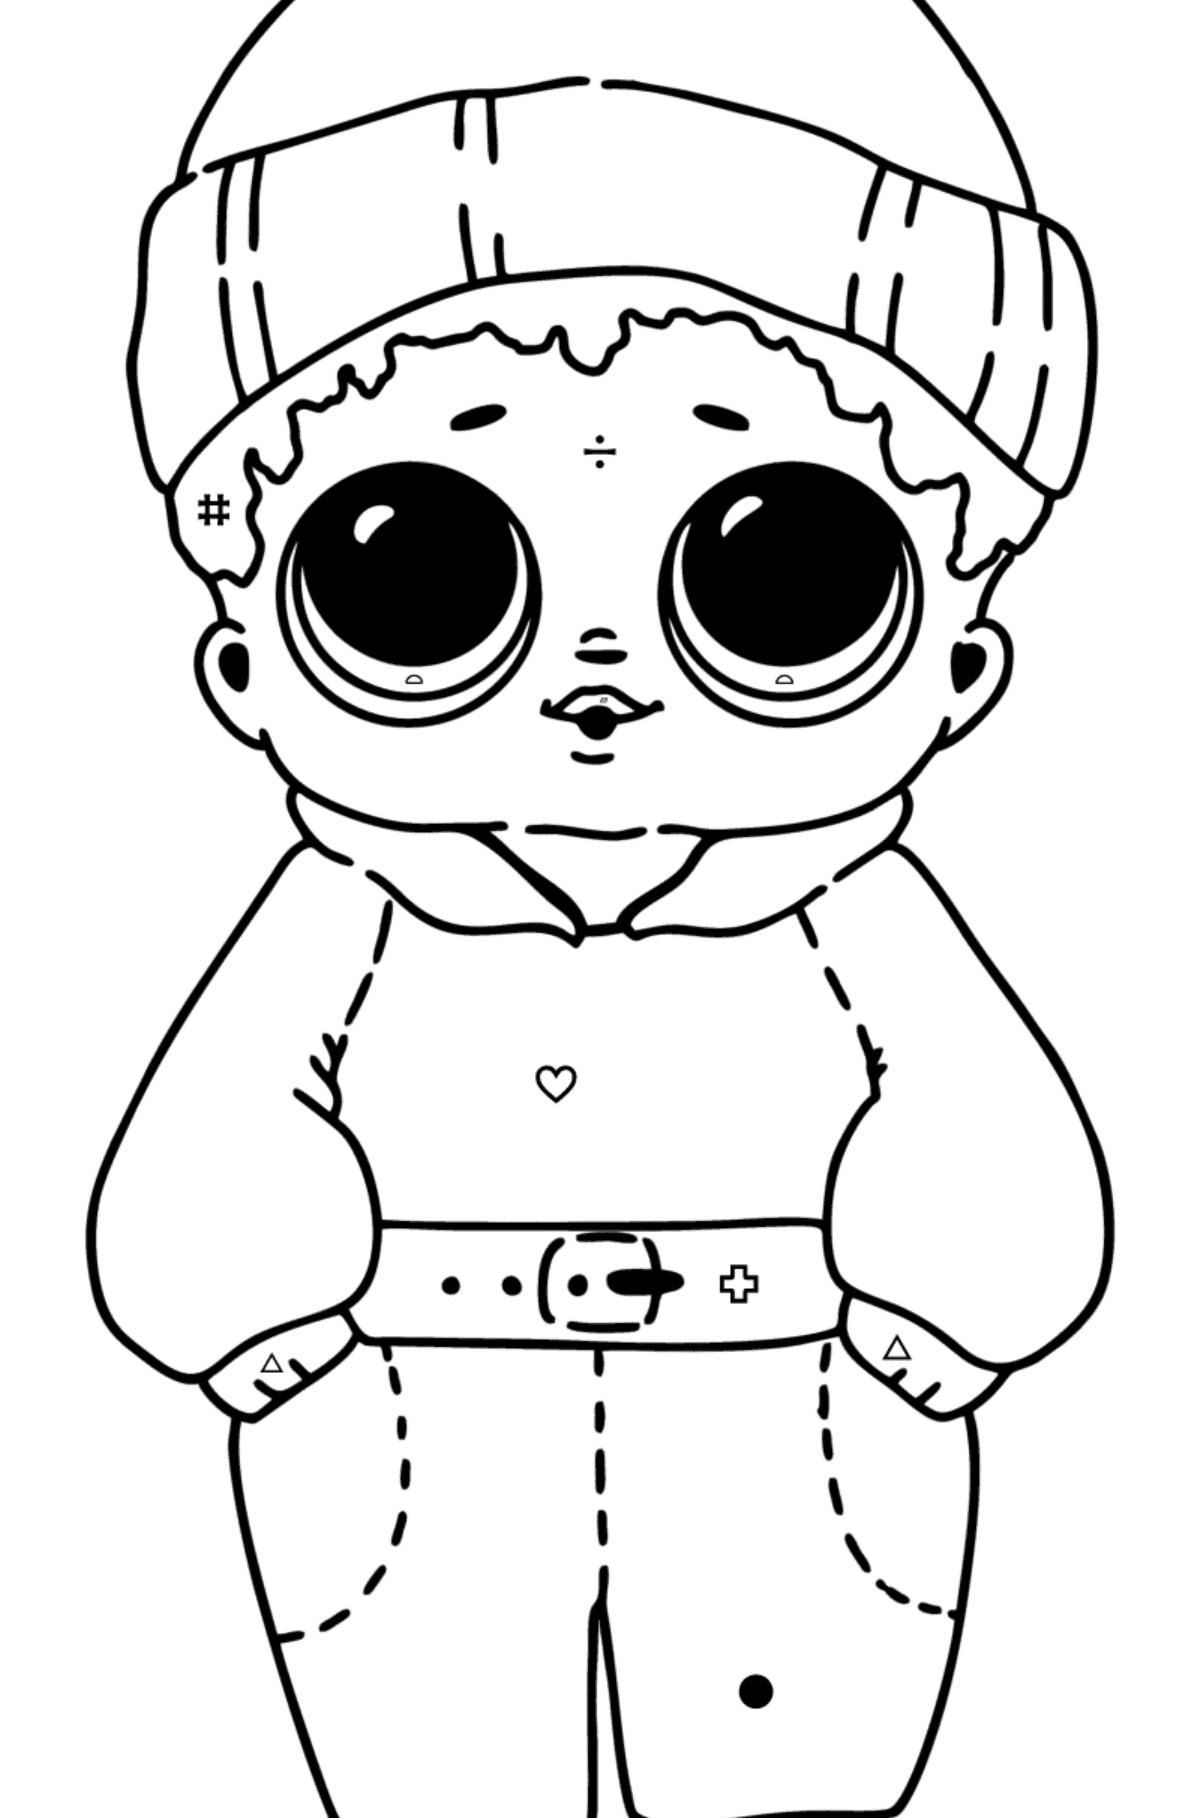 Coloring page LOL boy Sunny - Coloring by Symbols and Geometric Shapes for Kids